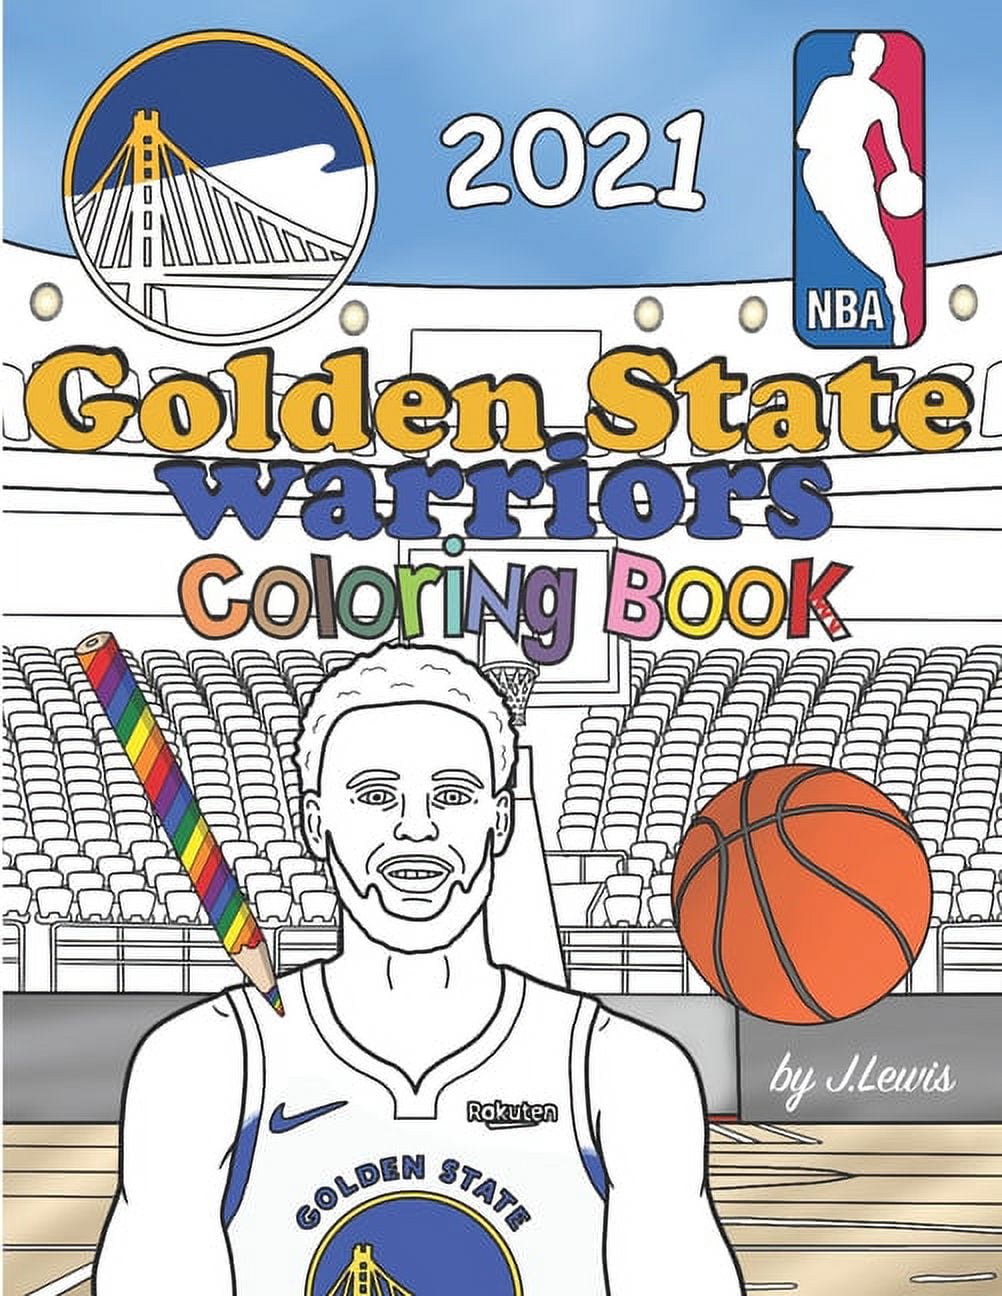 Golden state warriors coloring book basketball activity book for kids adults paperback